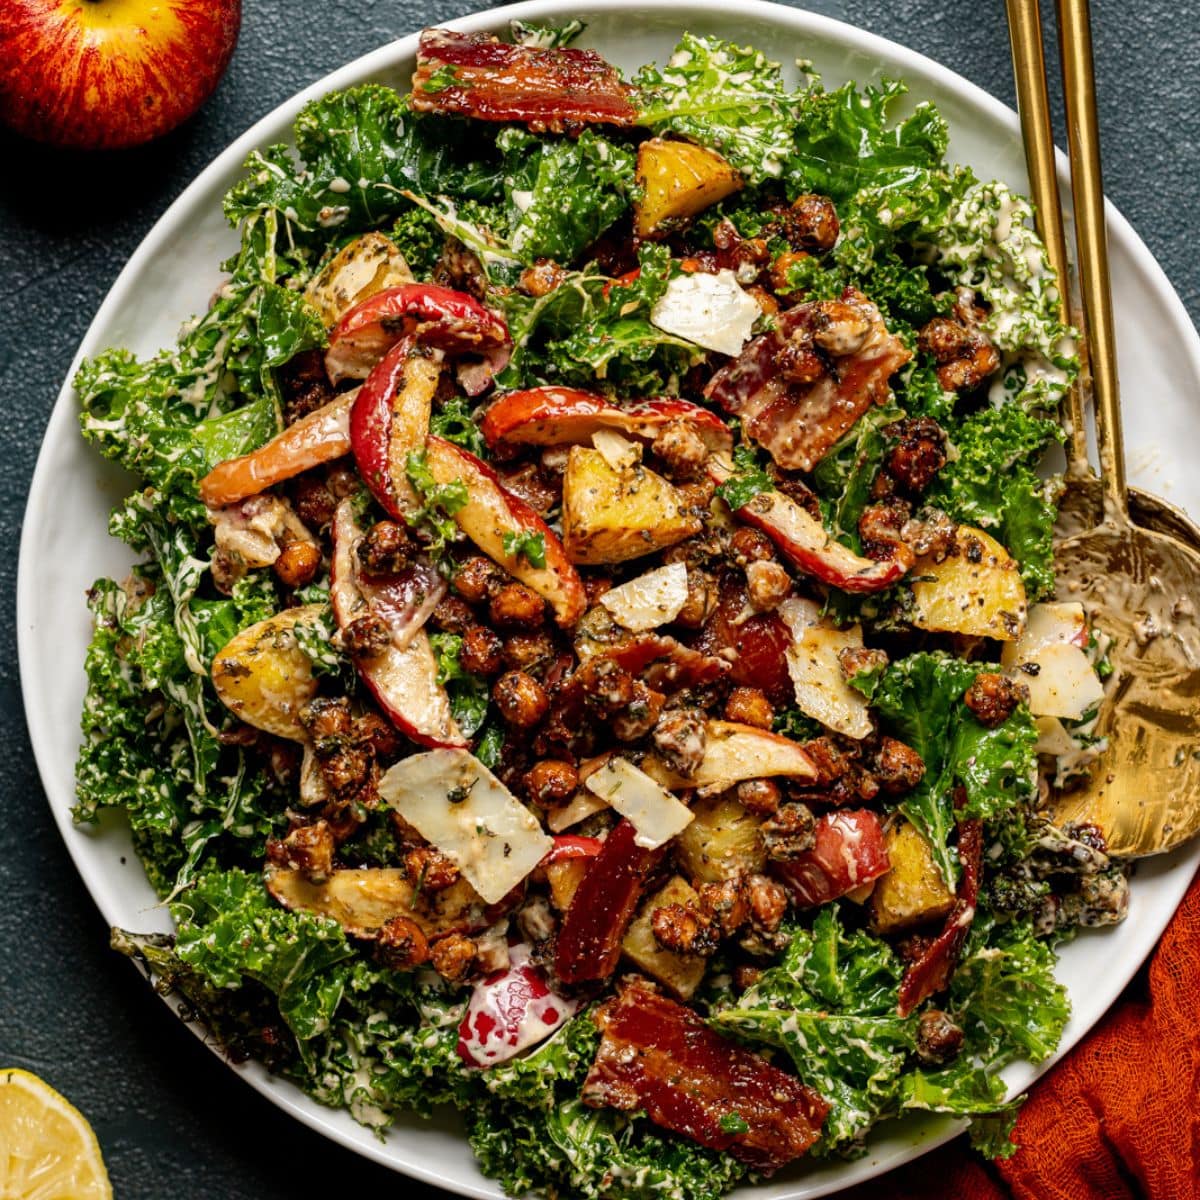 Full kale salad tossed in dressing with two gold serving spoons.